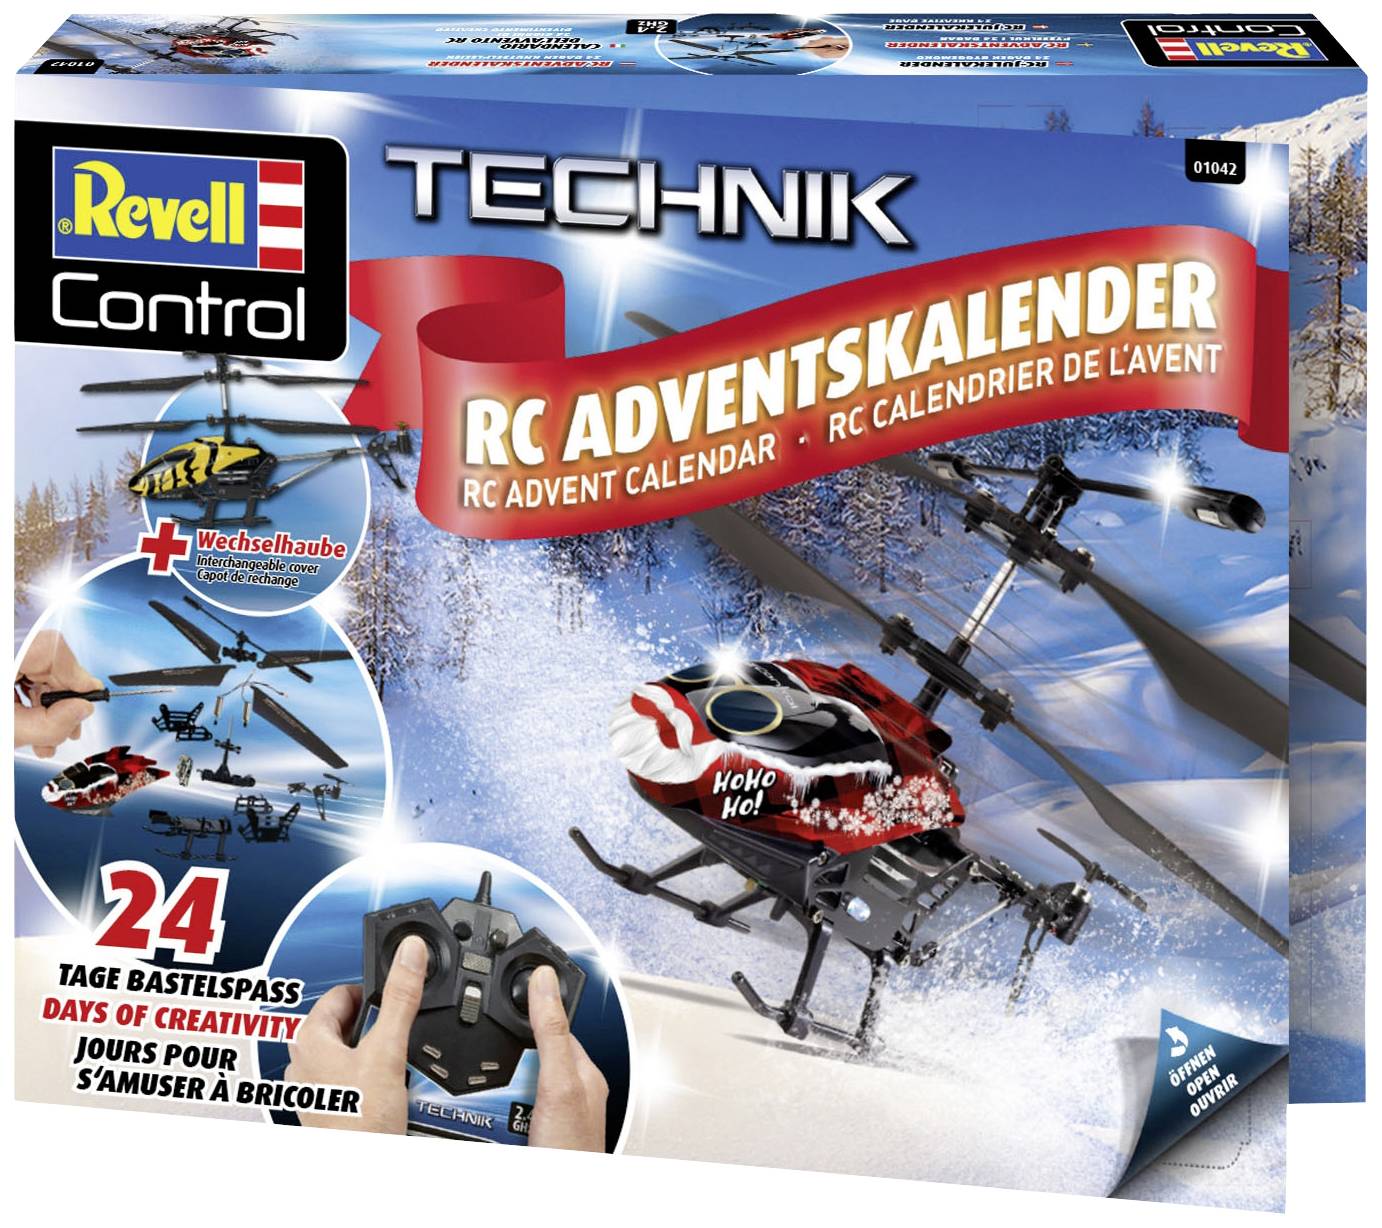 Revell Control Adventskalendar RC Helicopter RC helicopter Advent